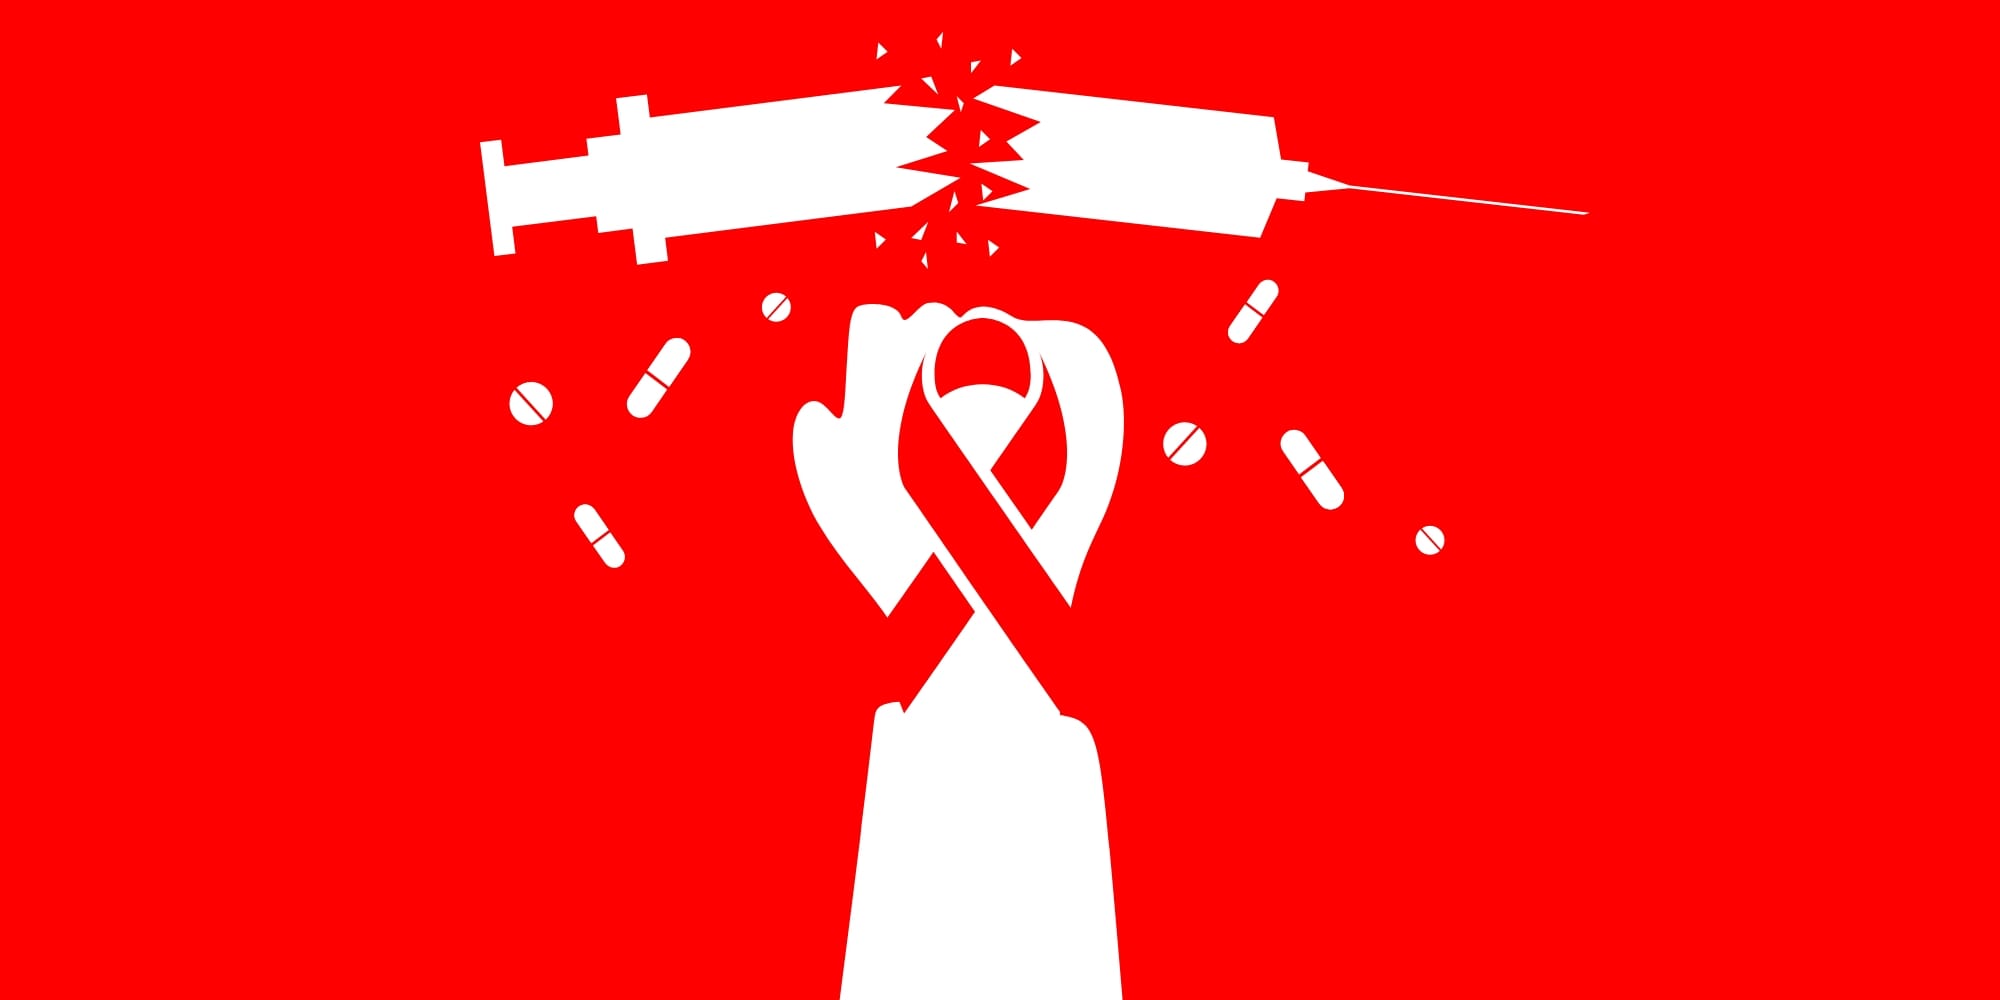 Red Ribbon Week Ideas & Promotional Items to Support Substance Abuse Awareness for 2023